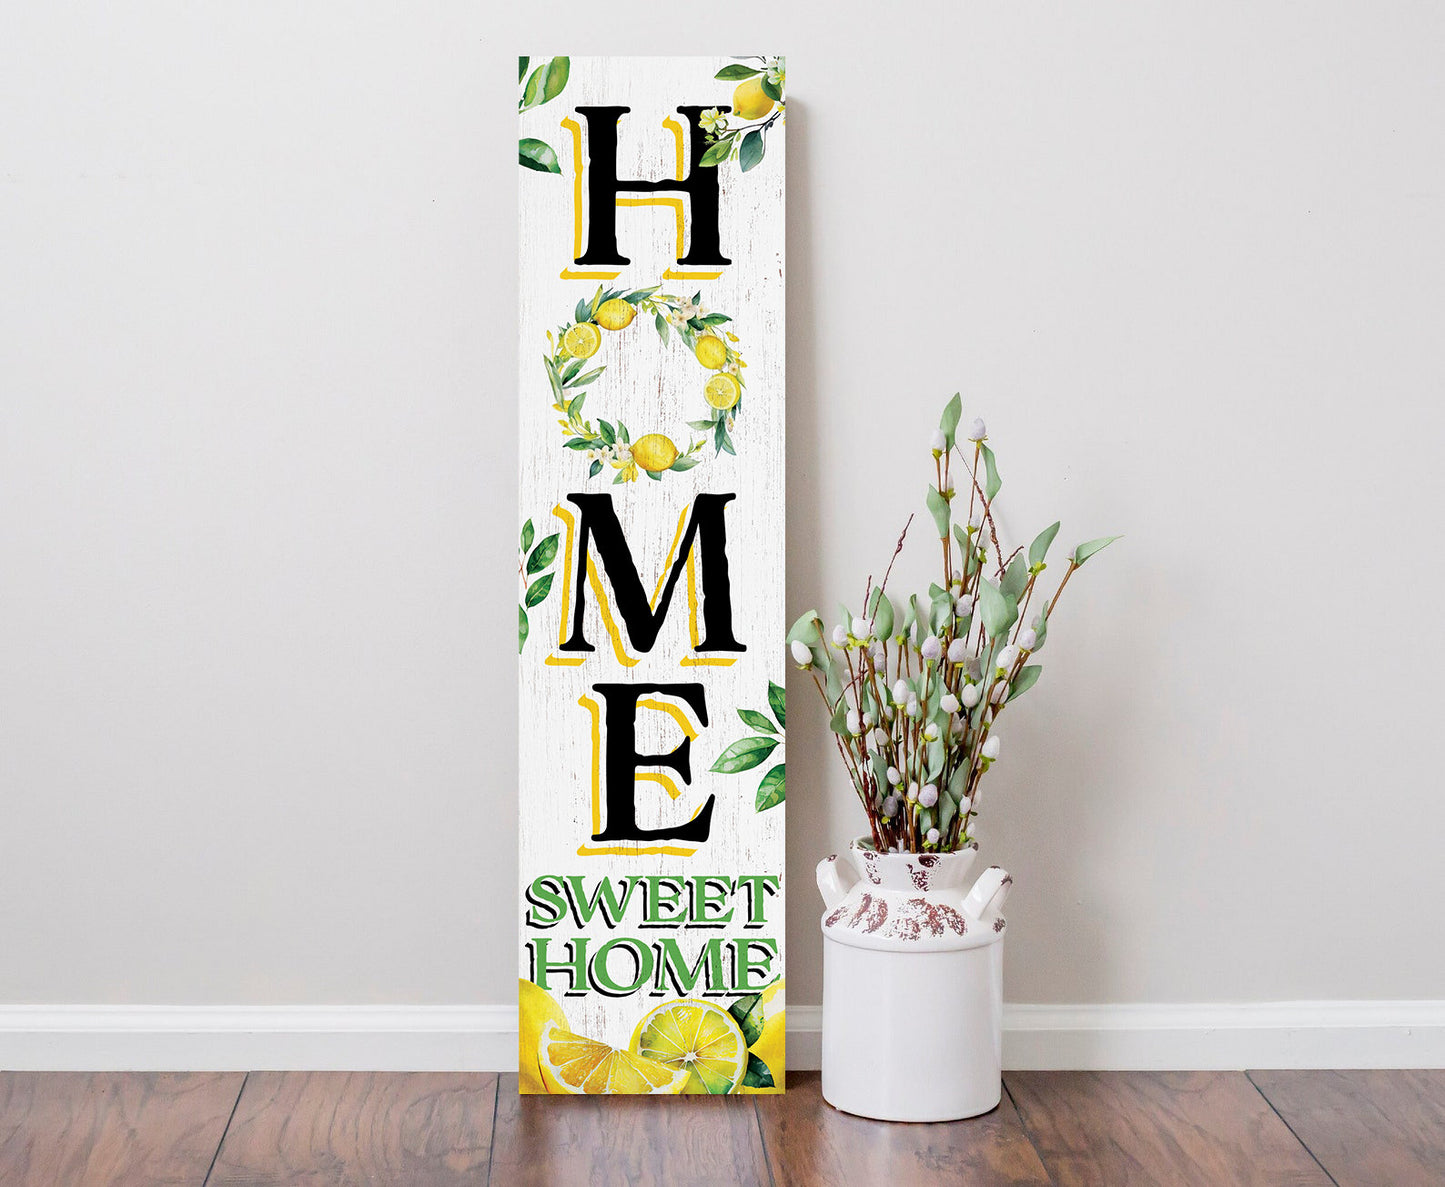 36in Lemon Summer Home Sweet Home Porch Sign for Front Door, Rustic Wooden Wall Decor, Outdoor Farmhouse Patio Display, Cheerful Welcome